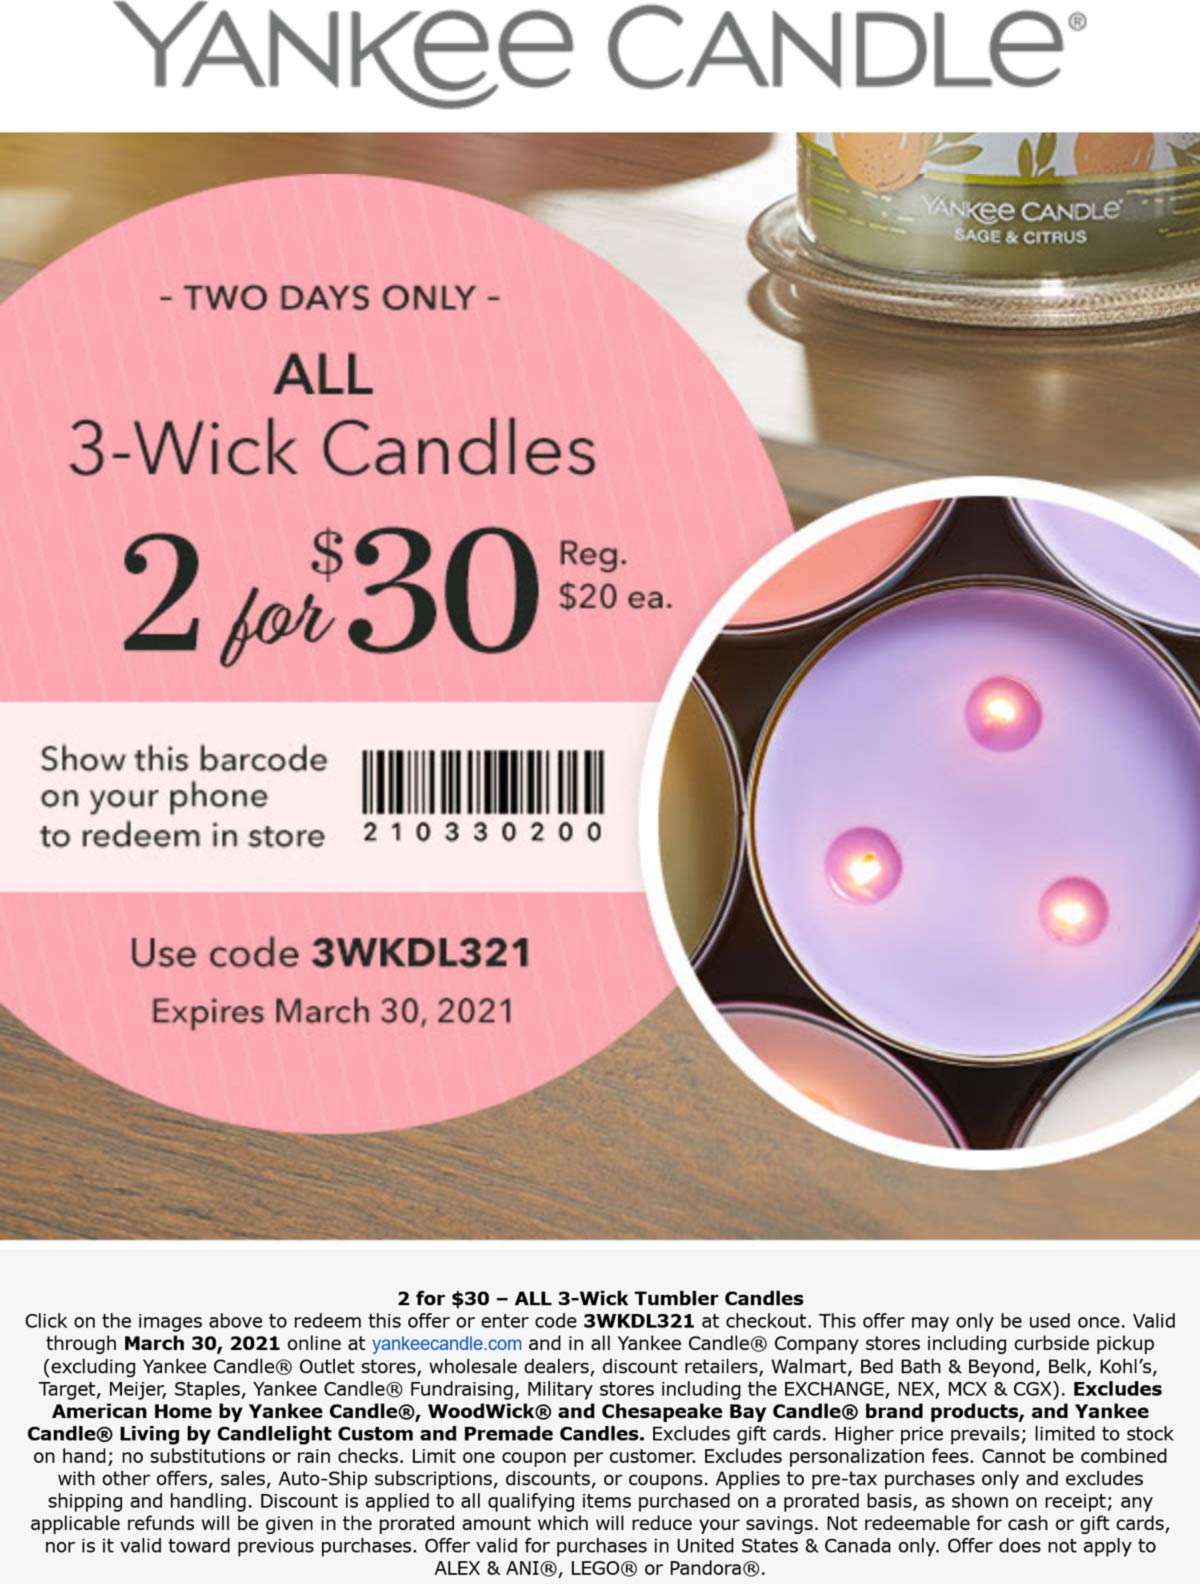 Yankee Candle stores Coupon  2 for $30 on 3-wick candles at Yankee Candle, or online via promo code 3WKDL321 #yankeecandle 